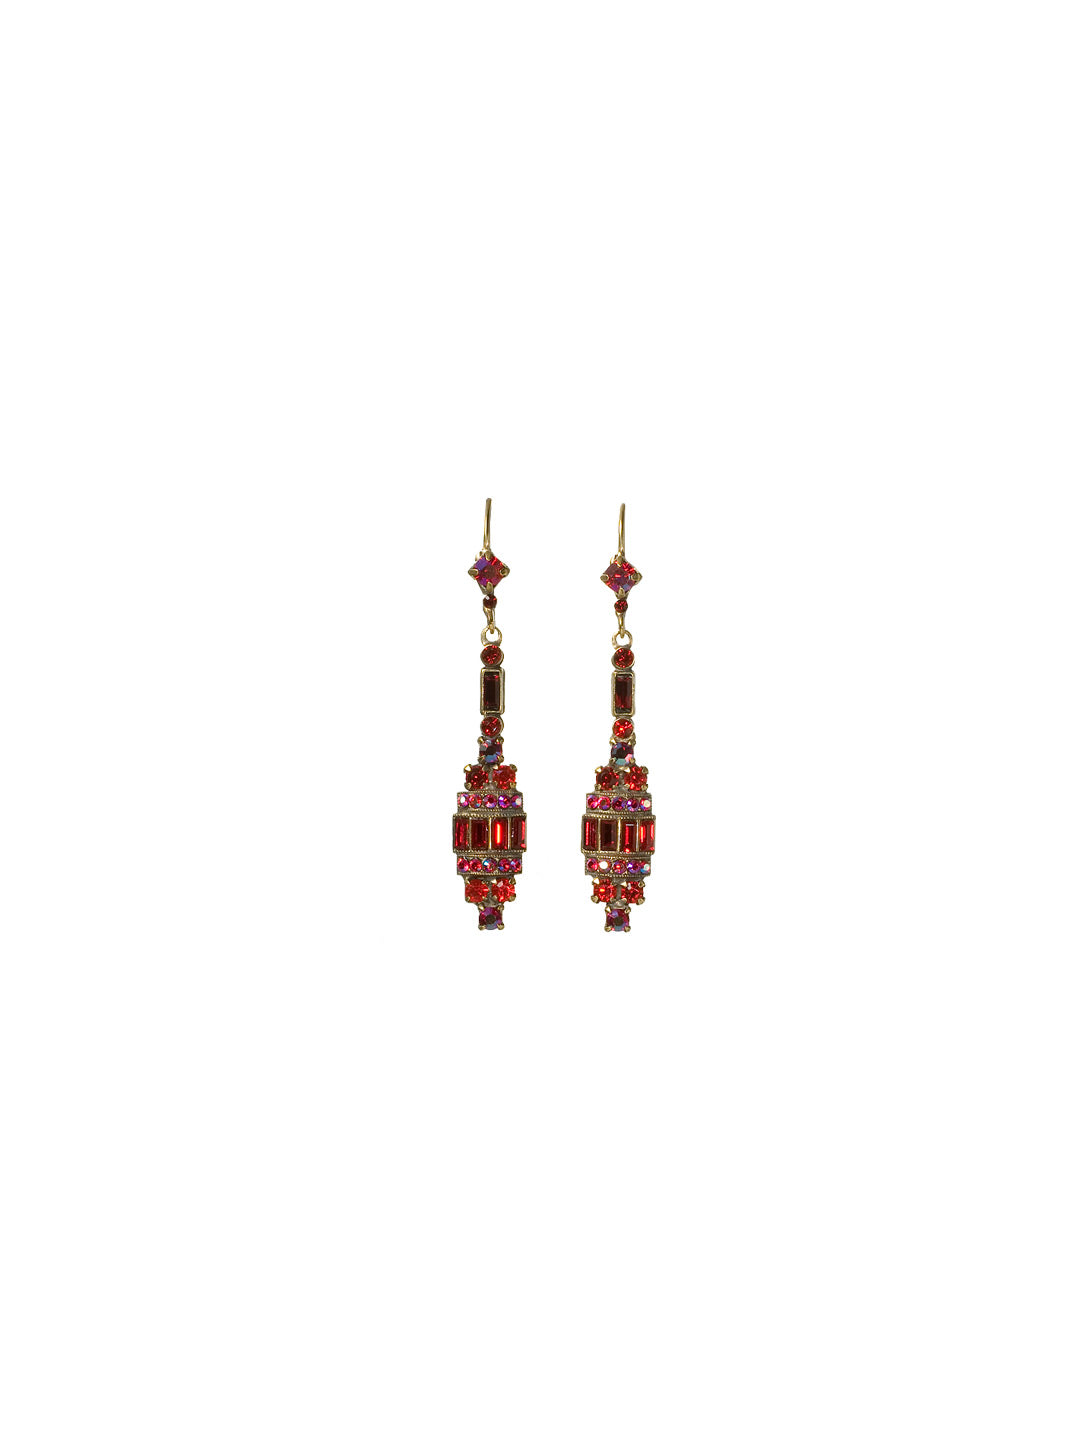 Glamorous Linear Crystal and Baguette Drop Earring - EBZ44AGCB